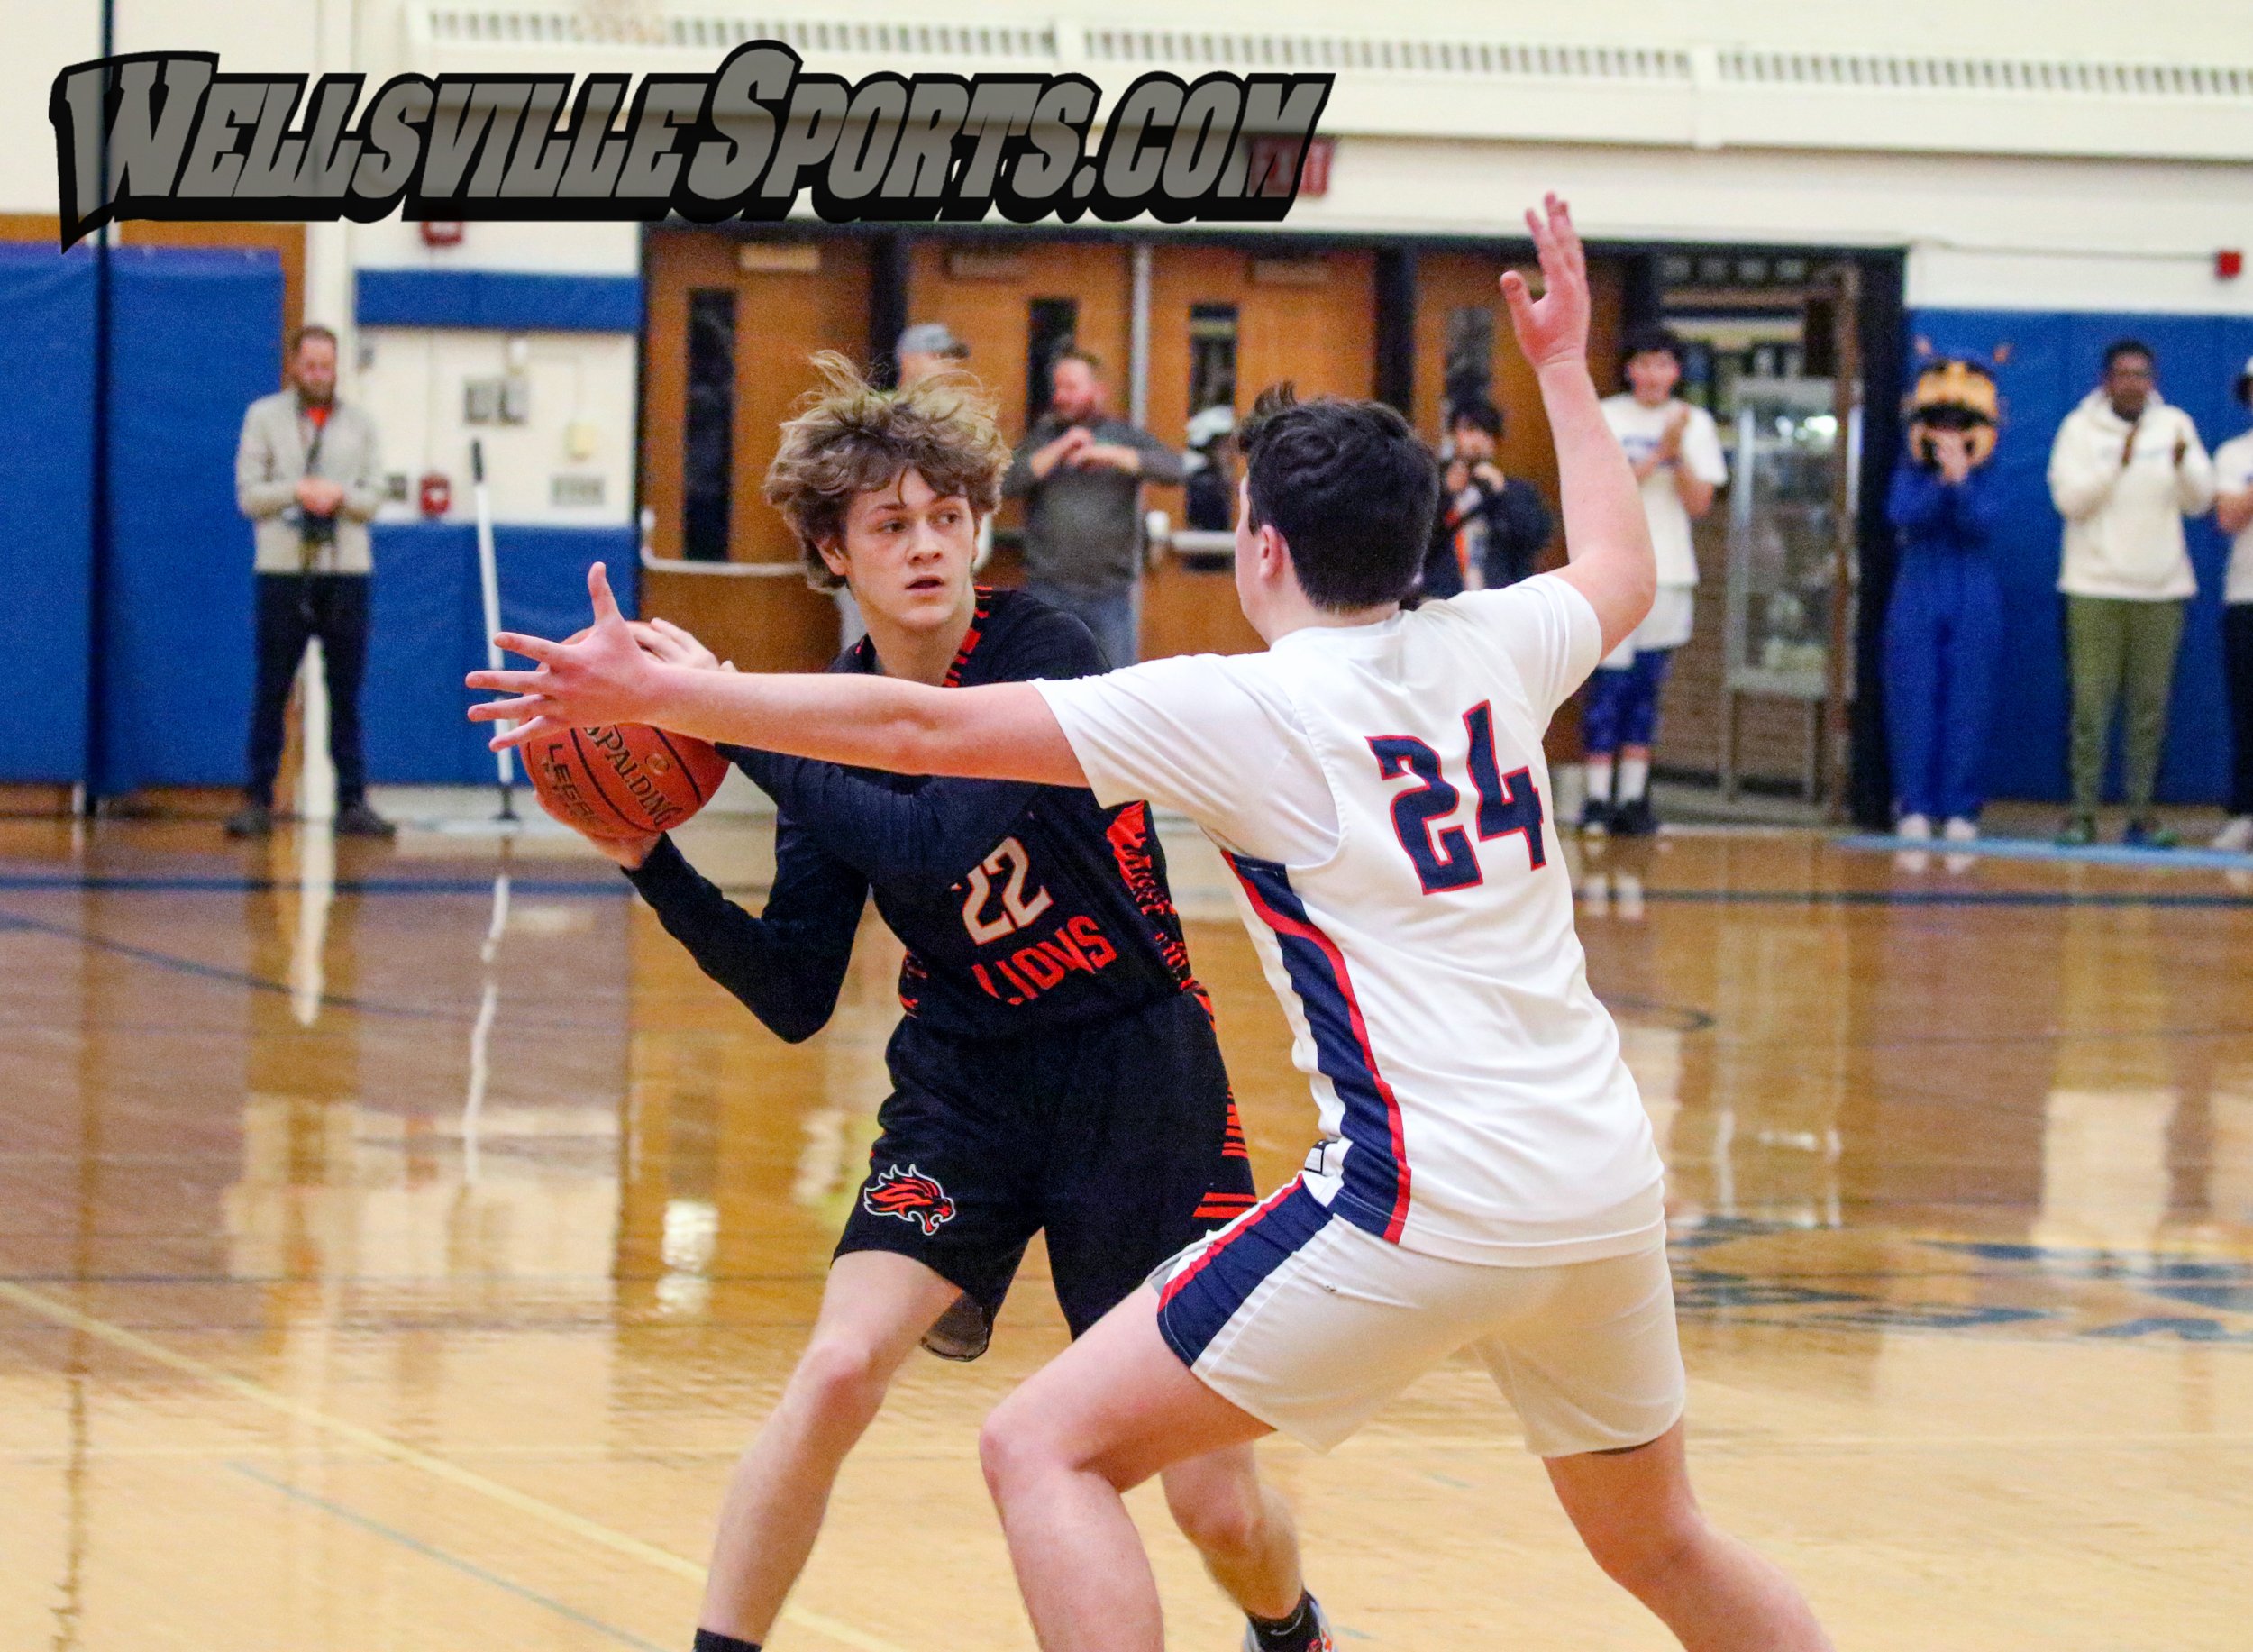  Wellsville junior Aidan Riley (22) looks to provide a pass to the inside while being pressured by the Mynderse defense during Saturday afternoon’s Class B2 Finals in Webster. [Chris Brooks/WellsvilleSports.com] 